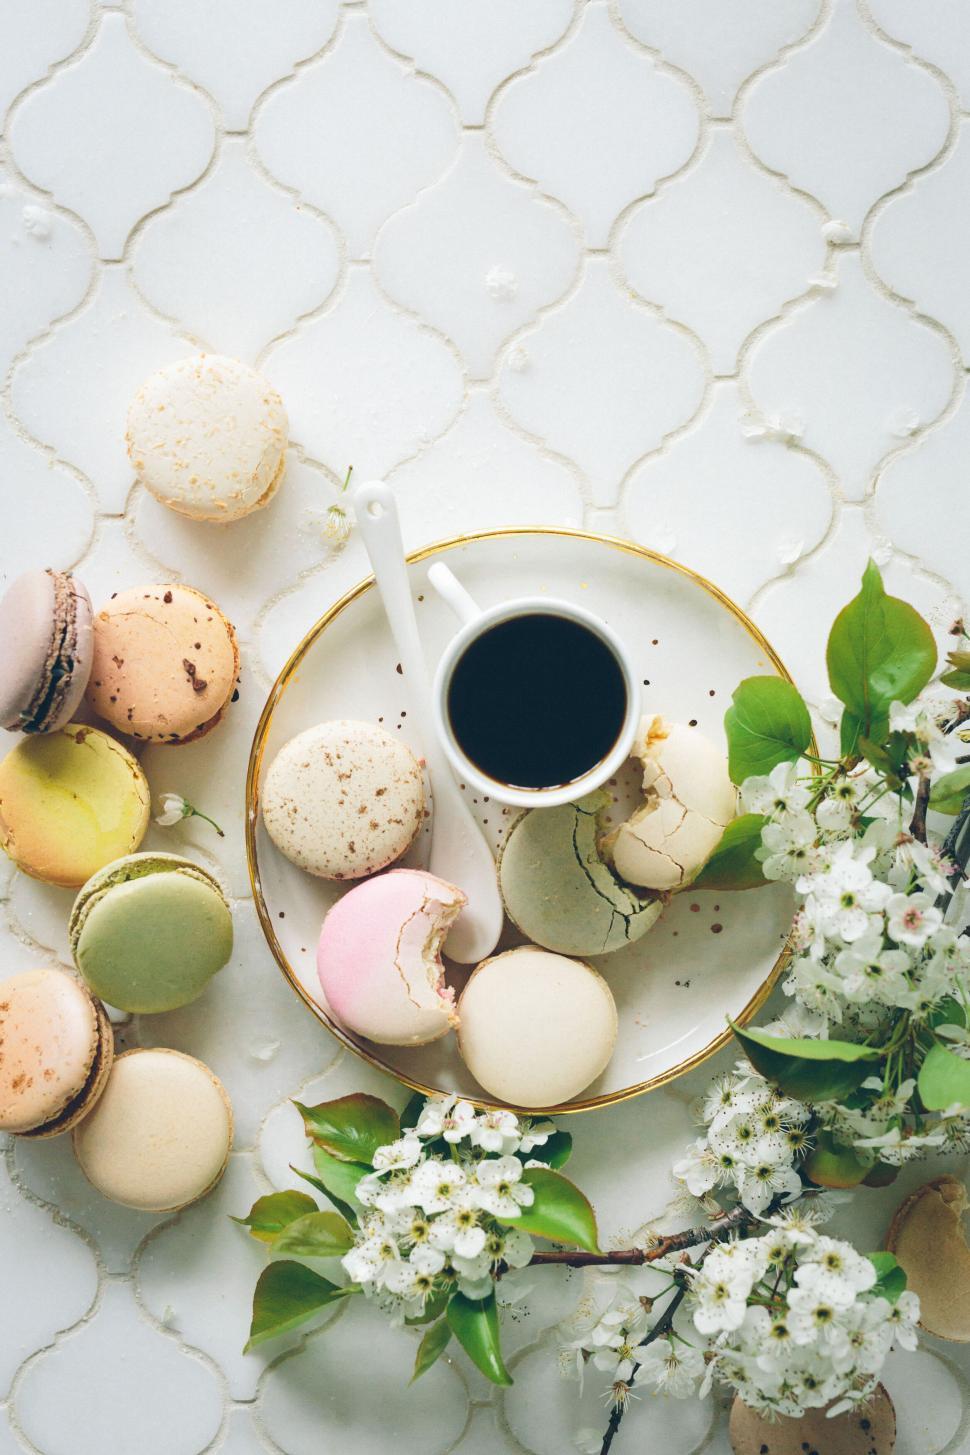 Free Image of Elegant tea setting with macarons and flowers 